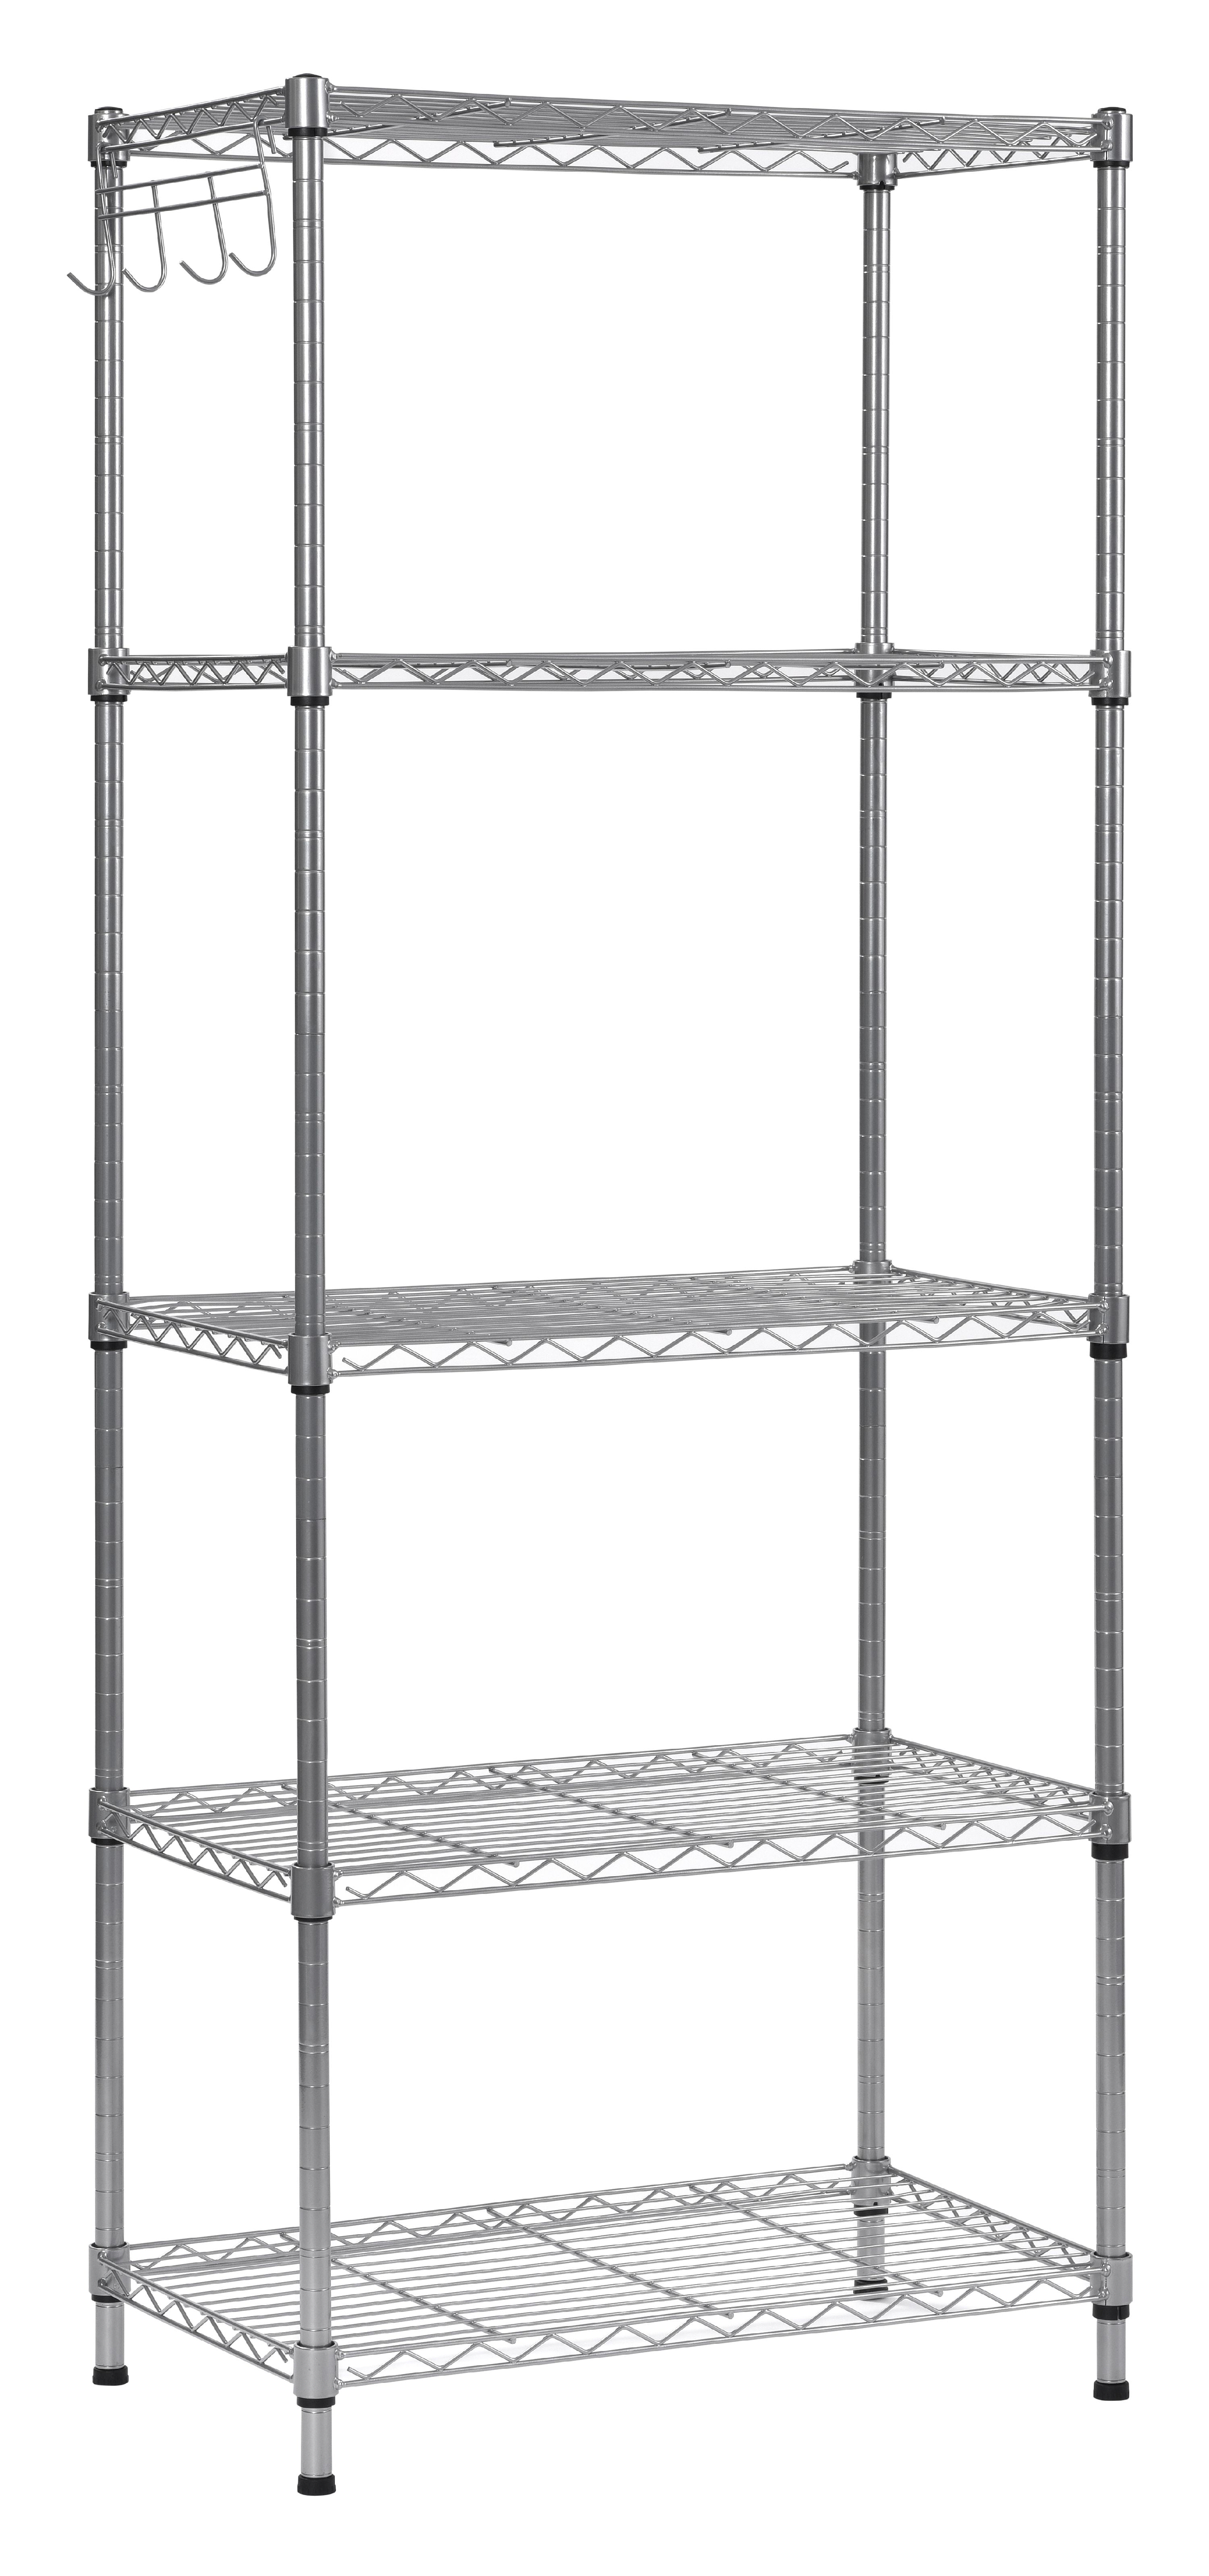 Muscle Rack 5 Tier Wire Shelving Unit, Wire Tower Shelving Unit